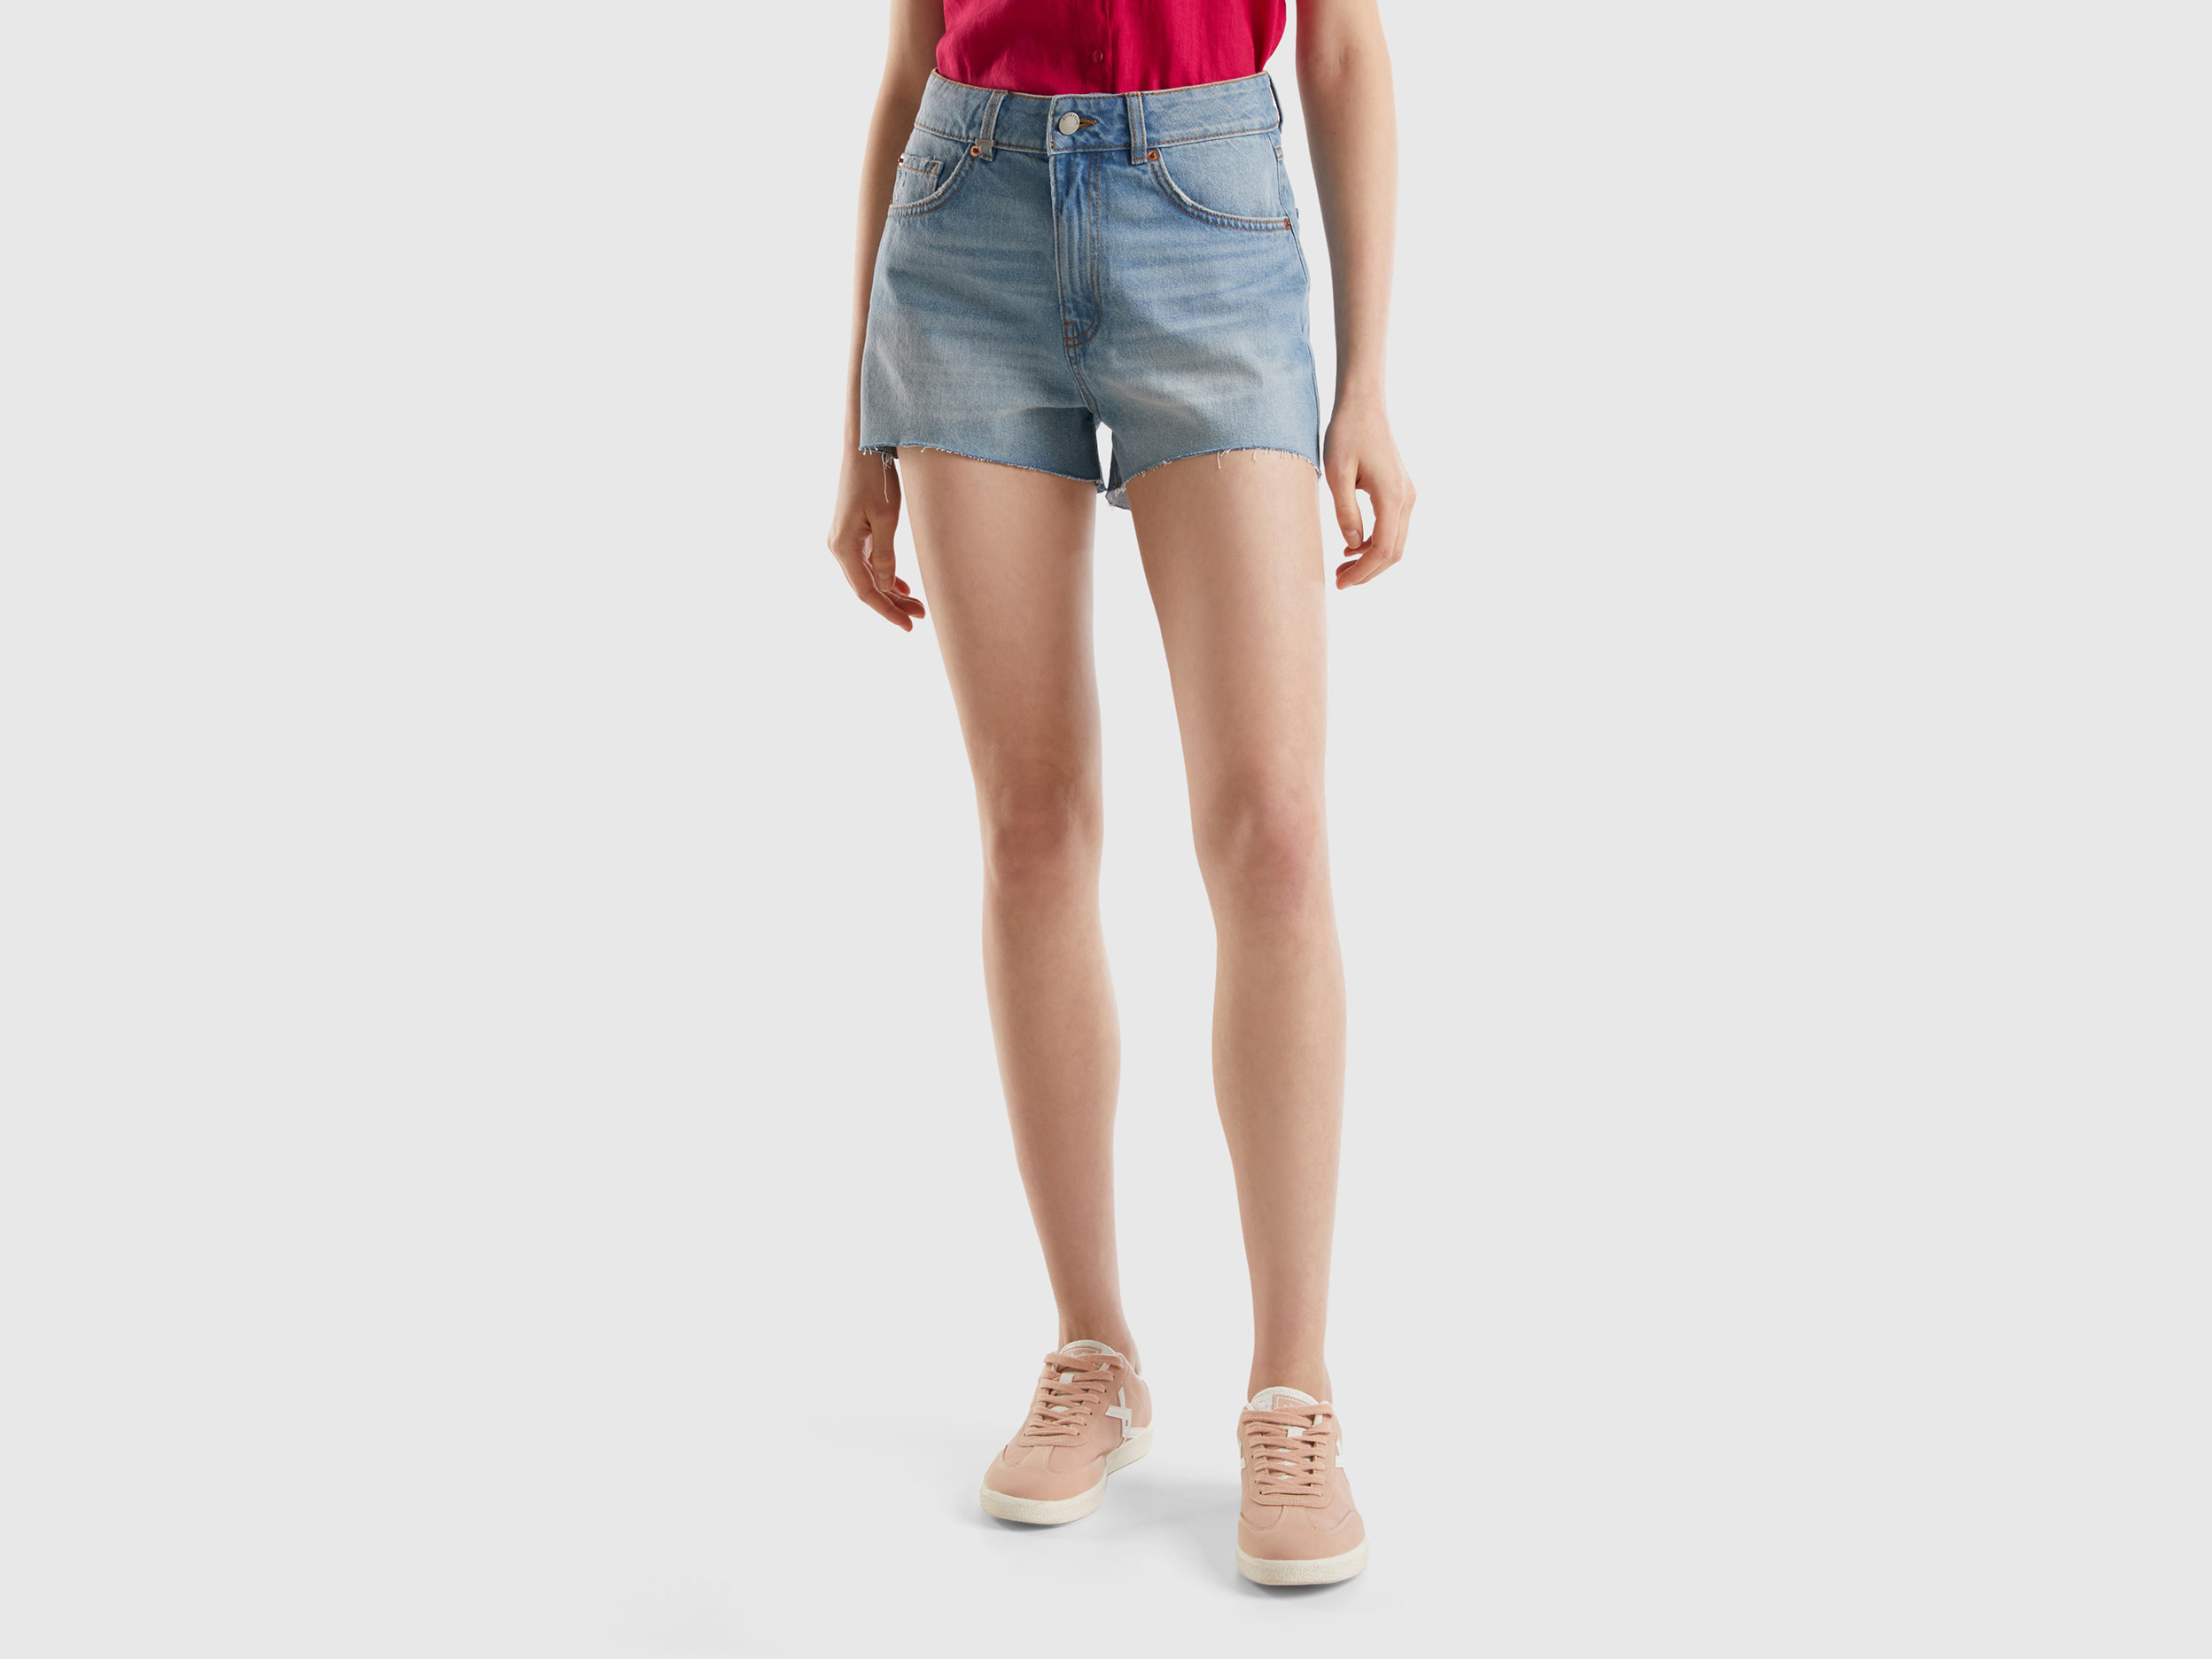 Image of Benetton, Frayed Shorts In Recycled Cotton Blend, size 26, Light Blue, Women